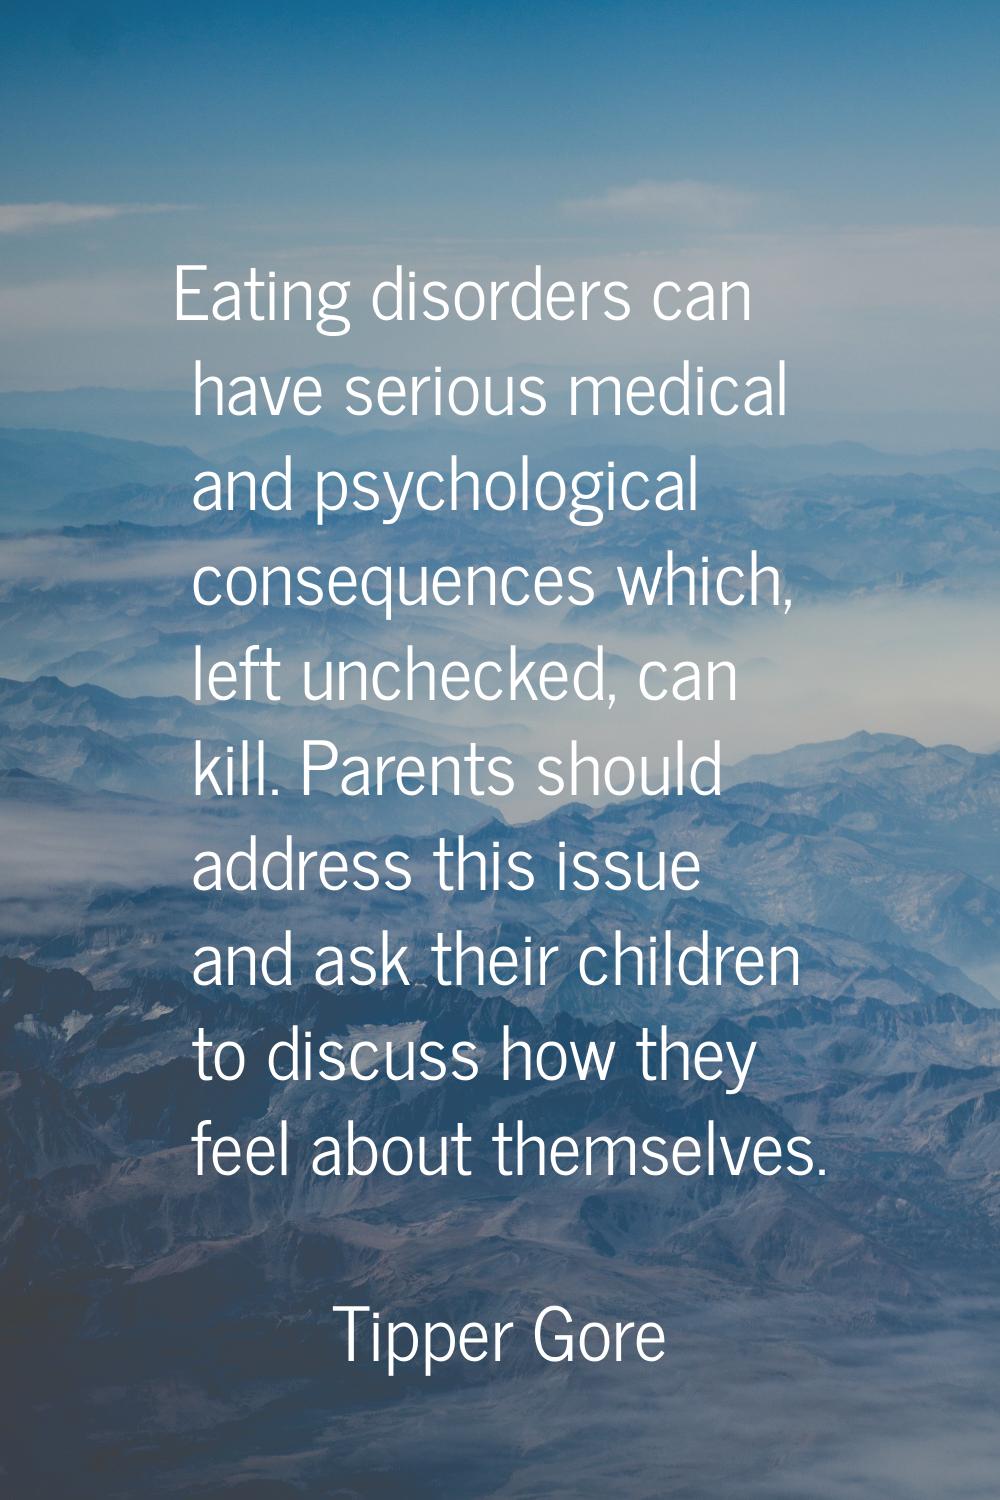 Eating disorders can have serious medical and psychological consequences which, left unchecked, can